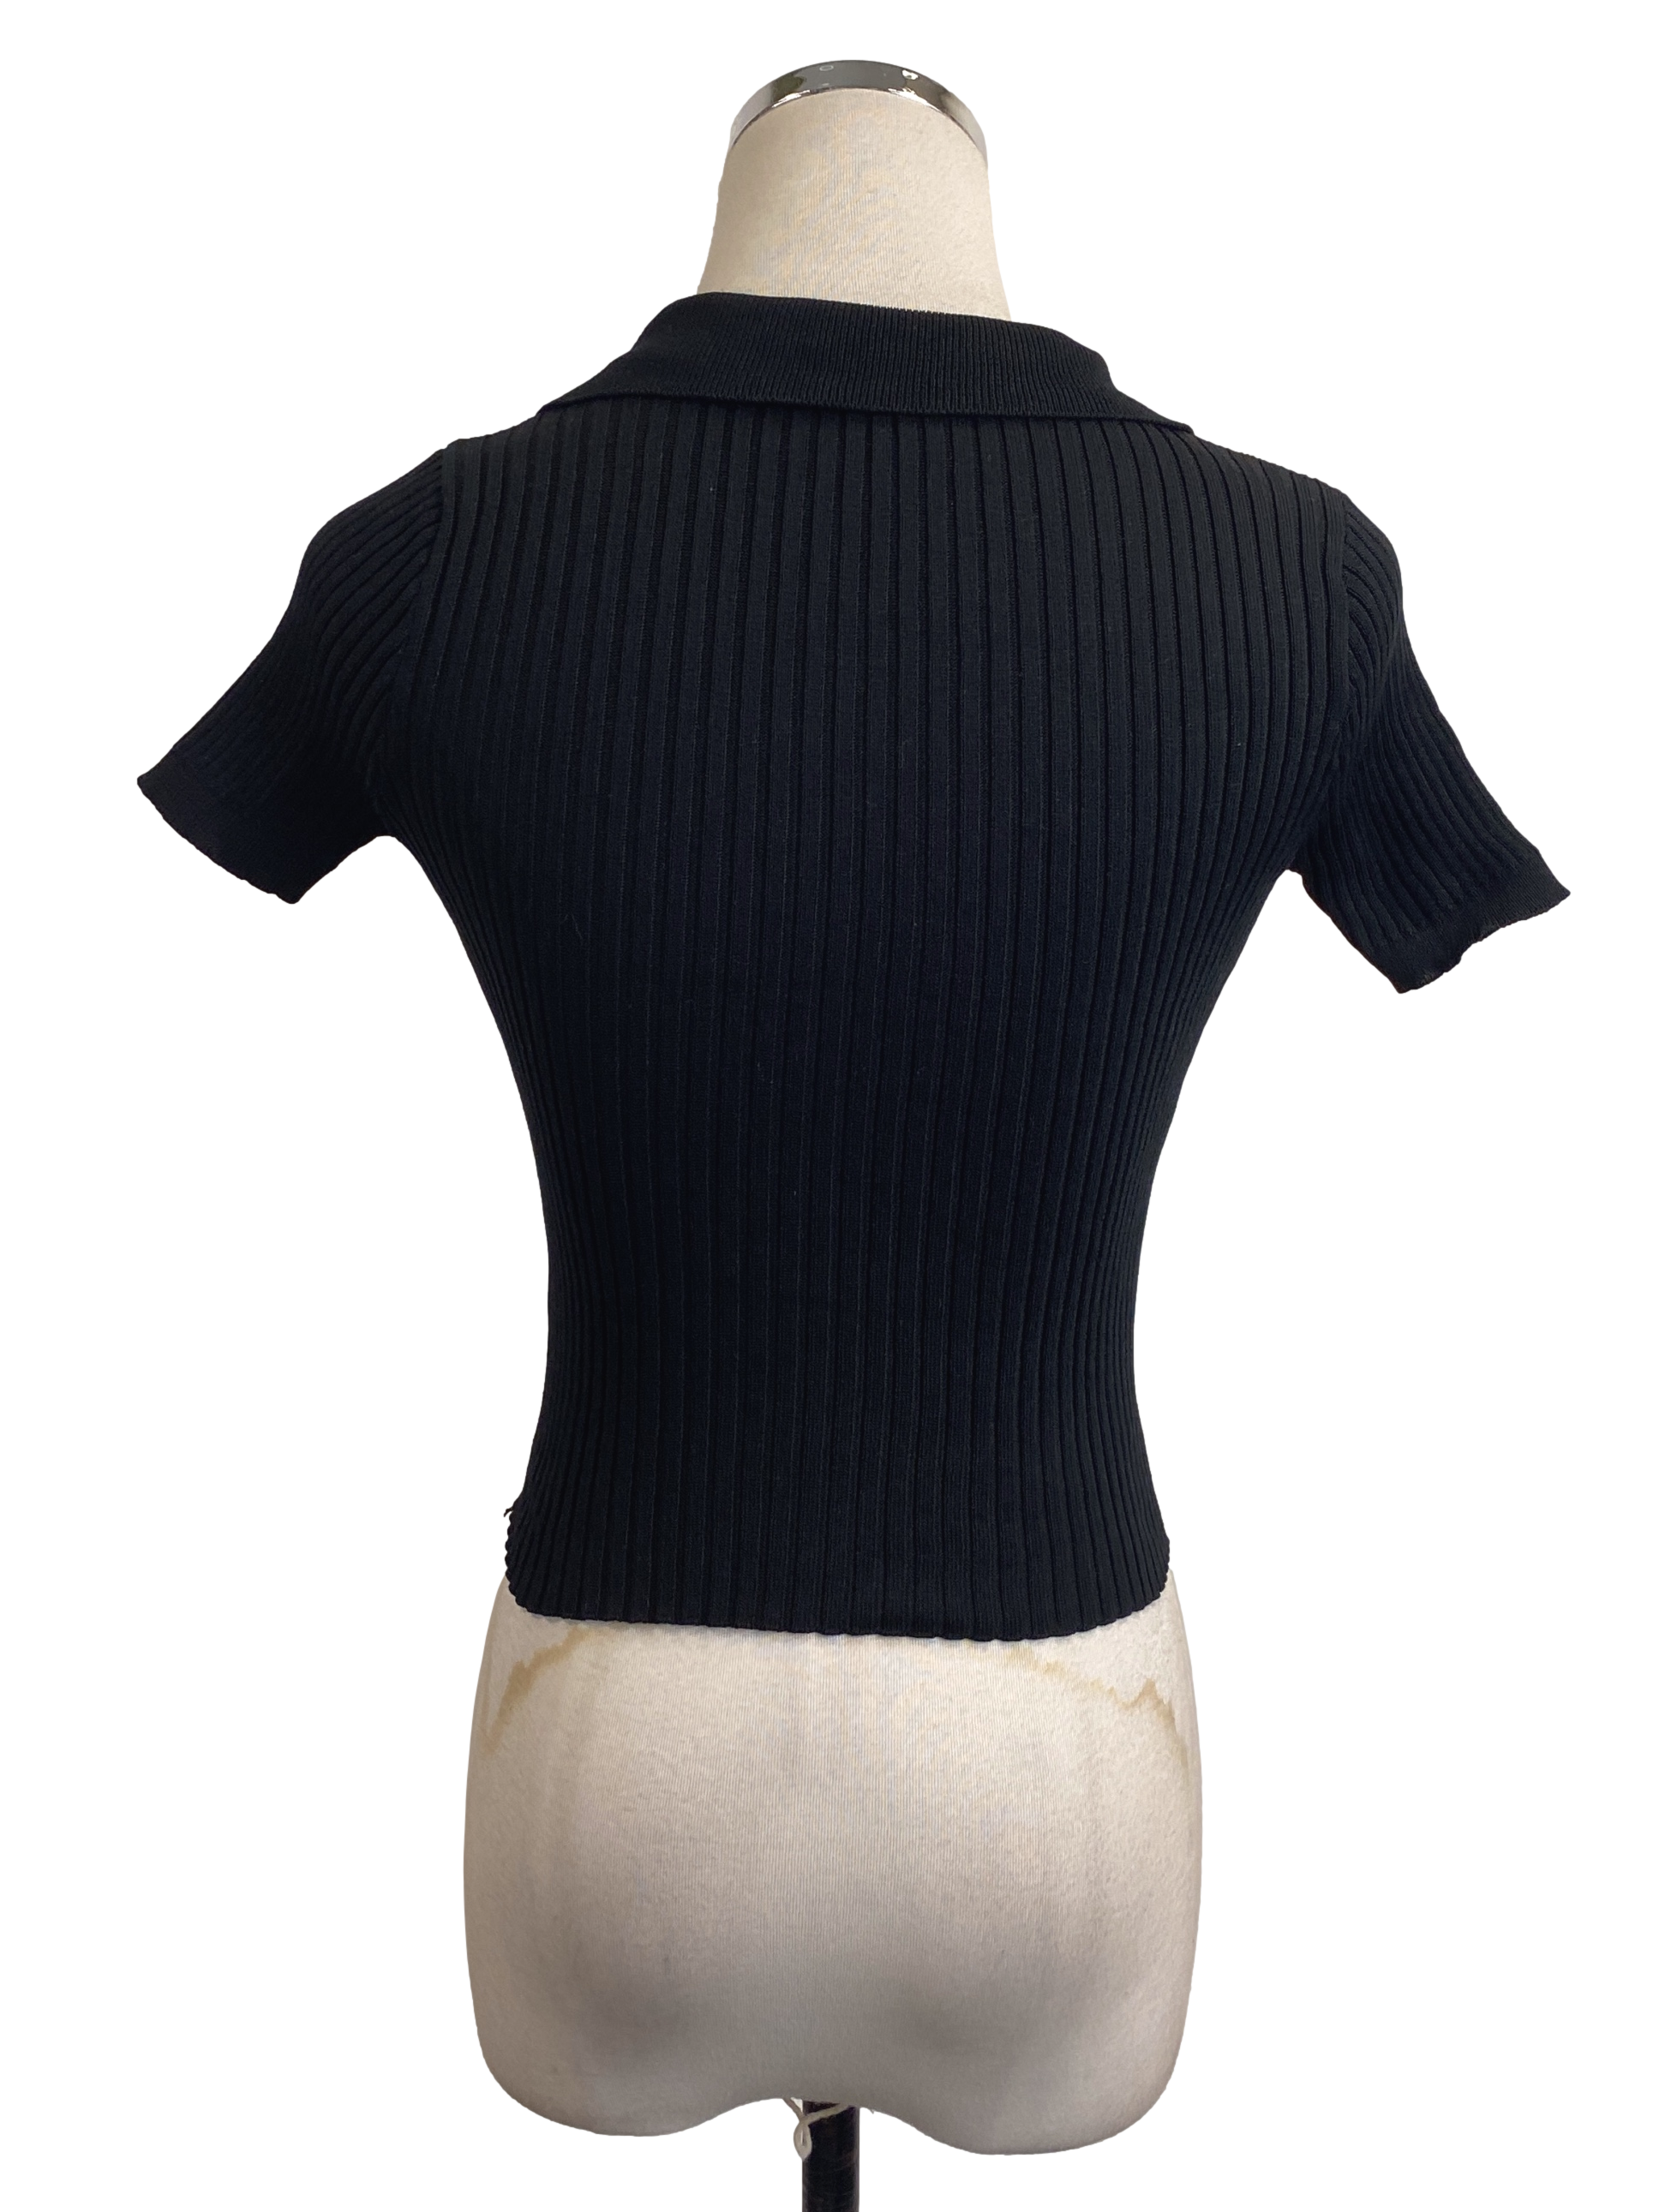 Black Ribbed Butooned Collared Top